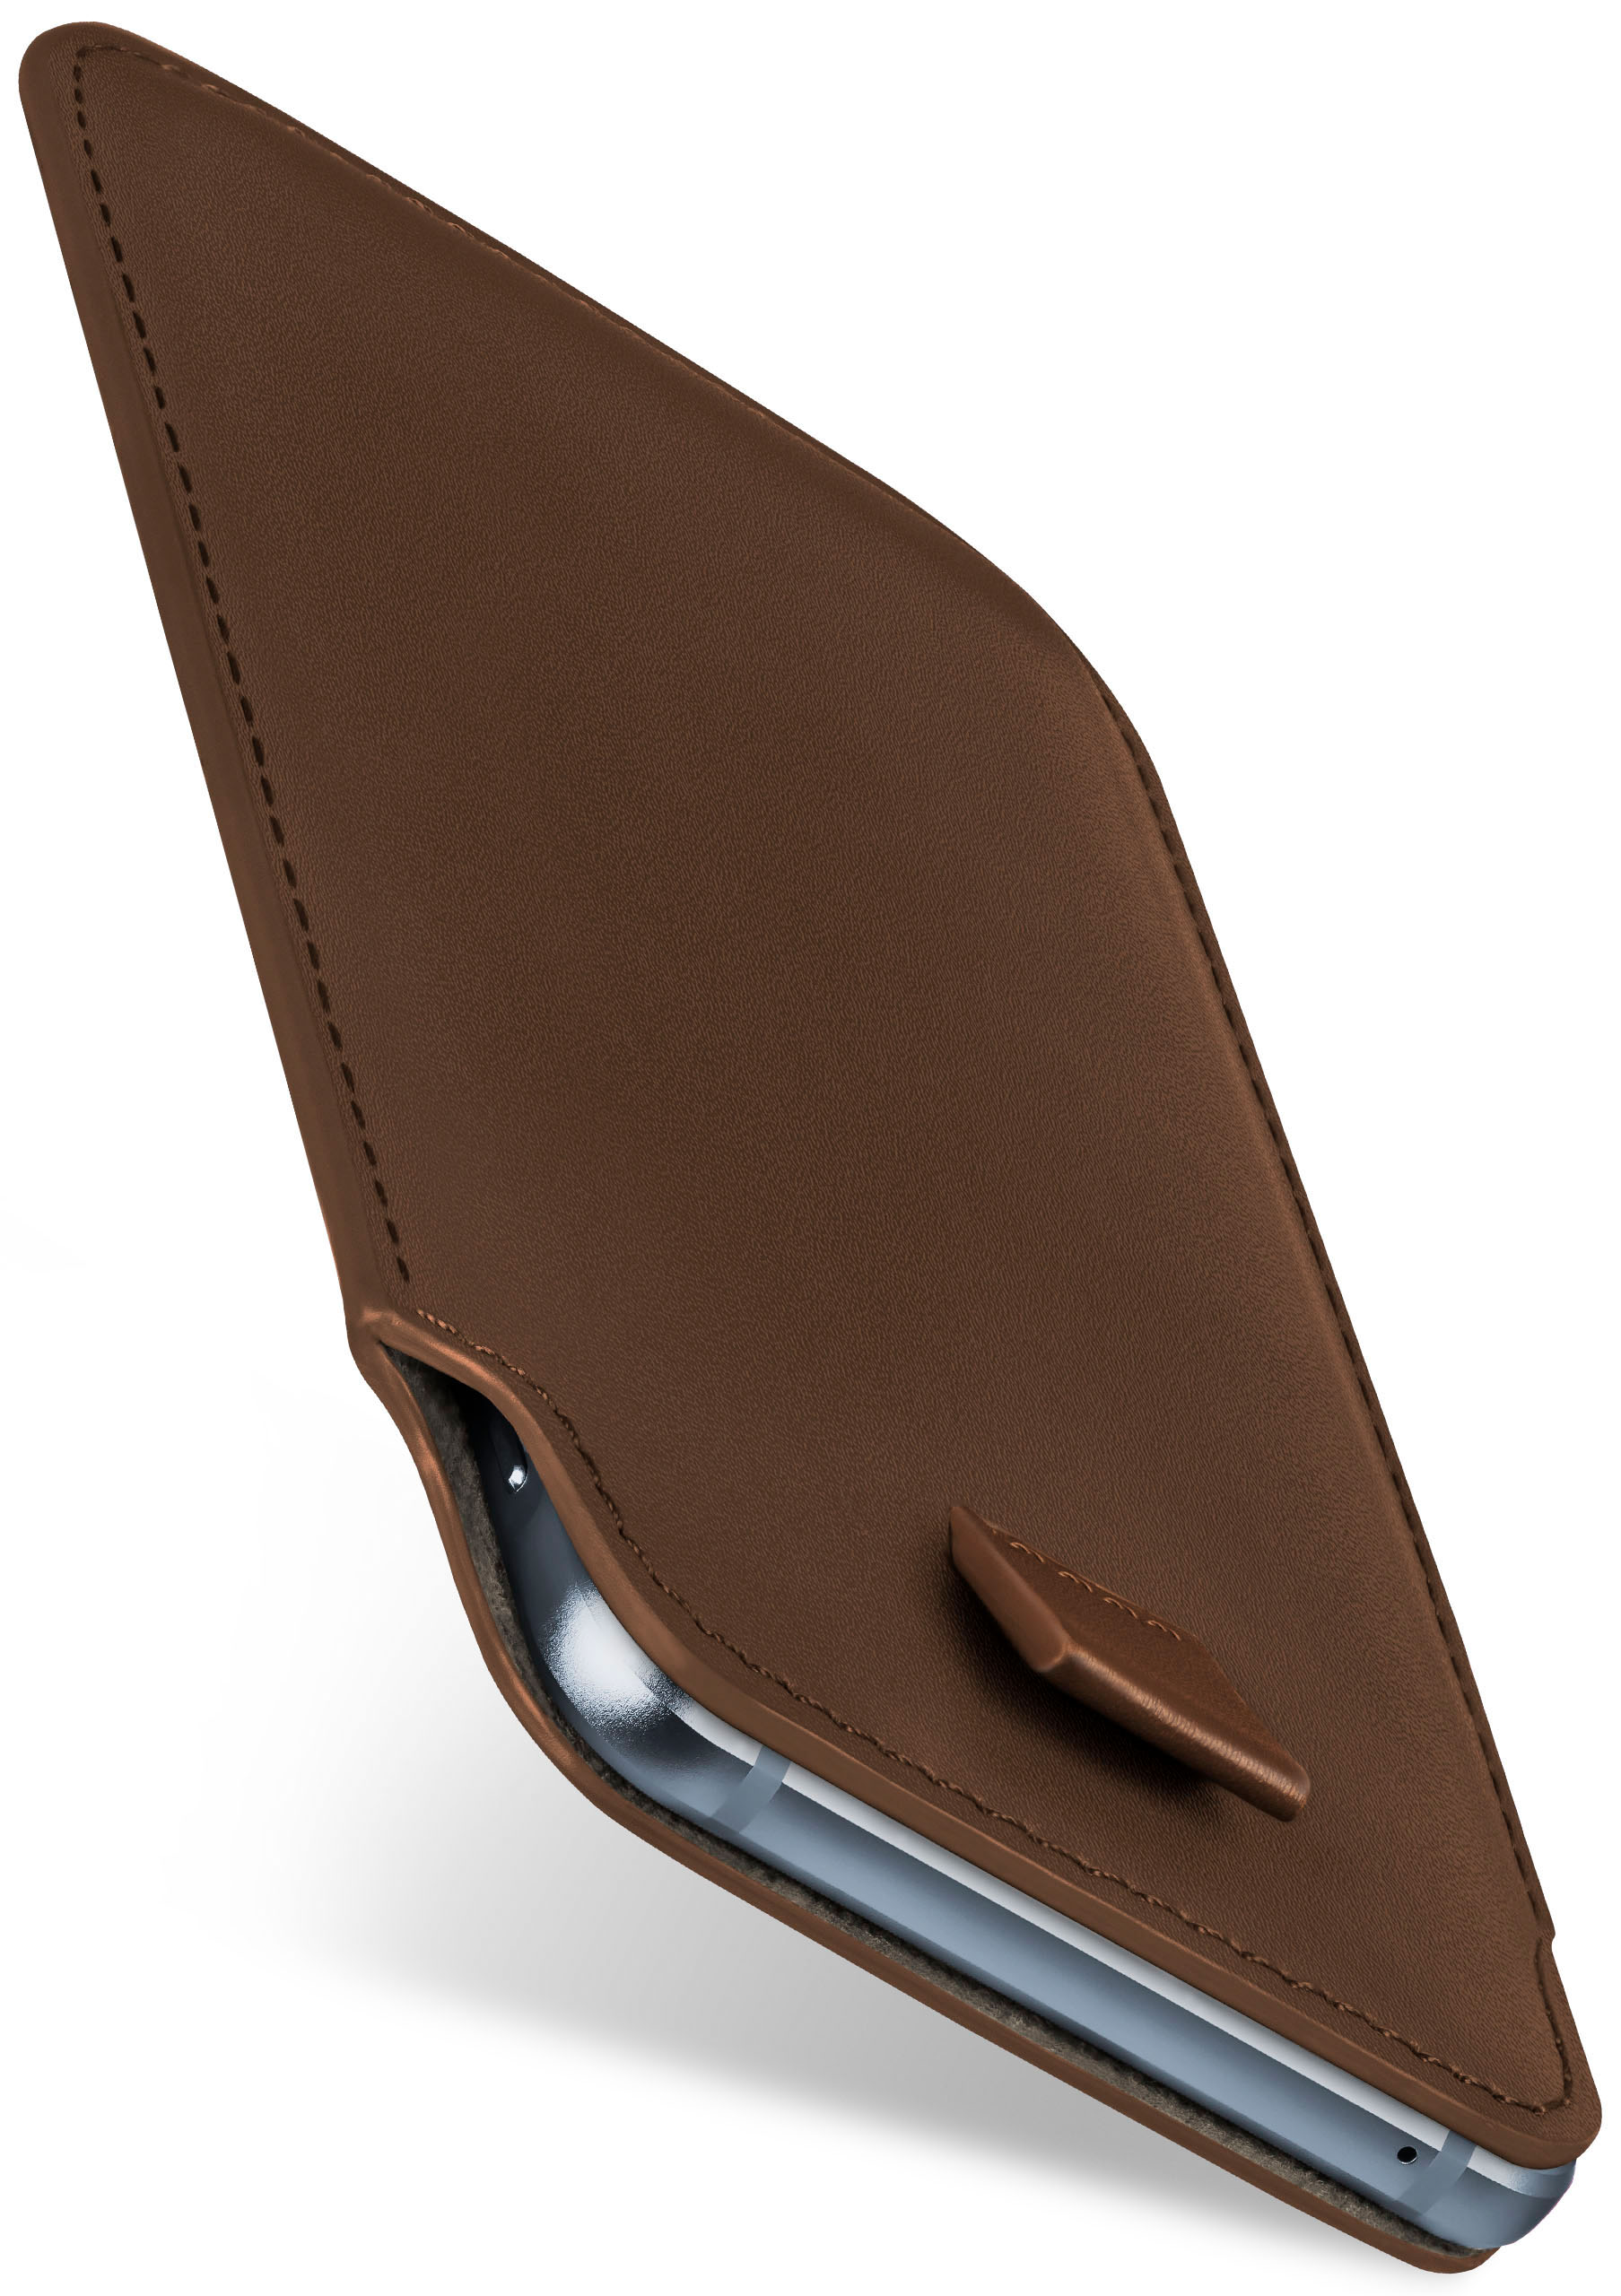 MOEX Slide Case, Full One Oxide-Brown Cover, HTC, M7